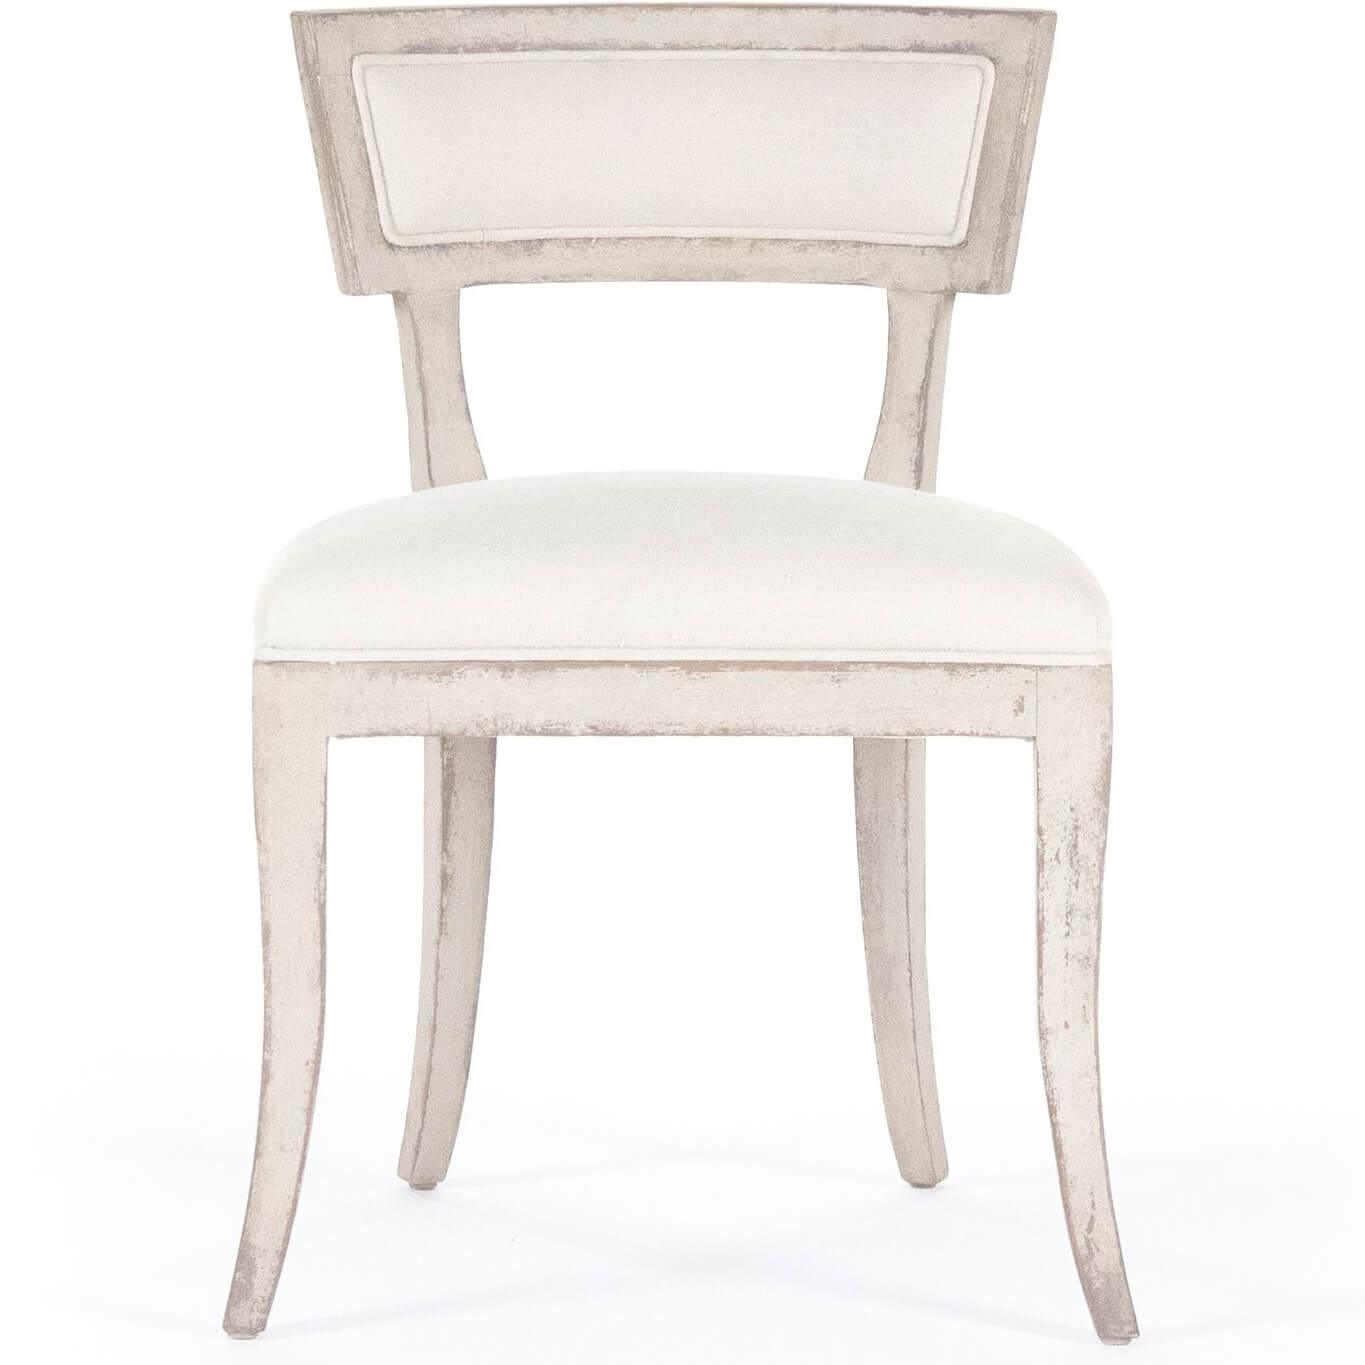 French Shabby Chic Side Chairs - Belle Escape